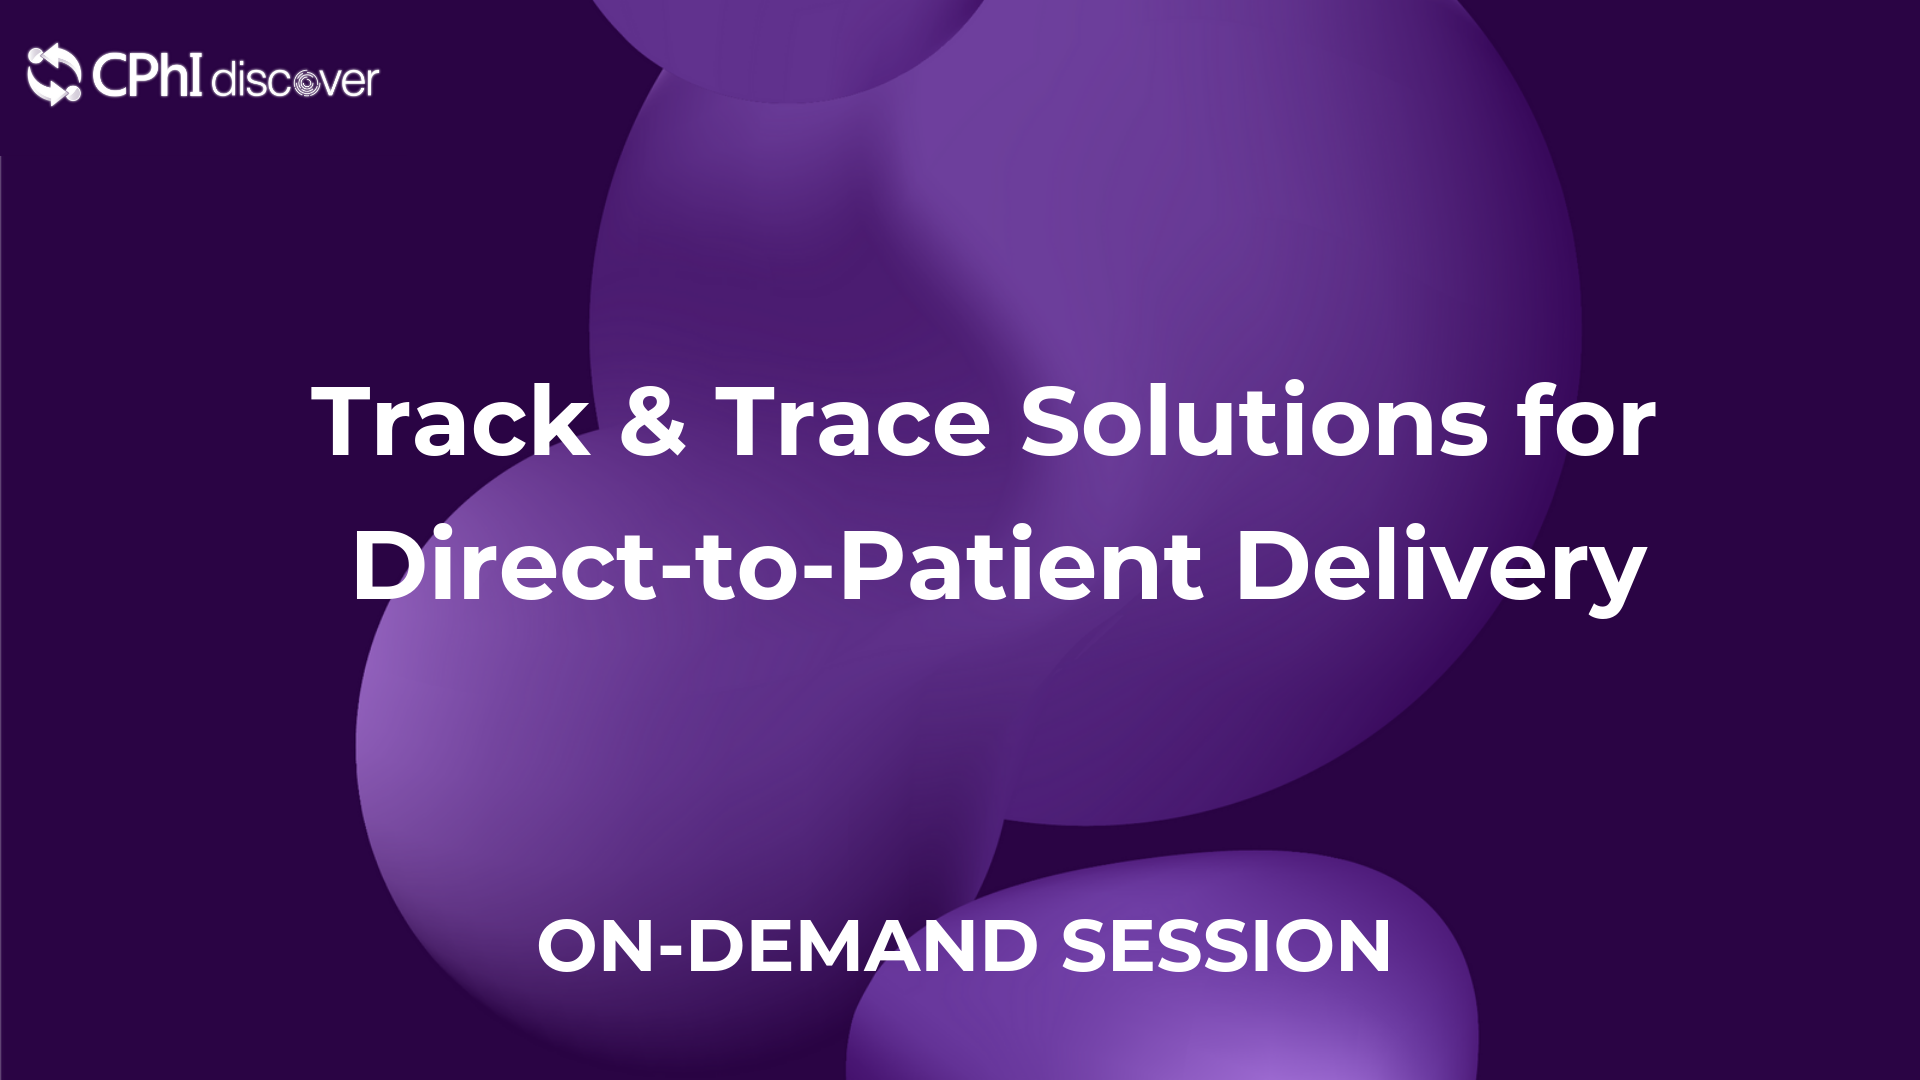 Track & Trace Solutions for Direct-to-Patient Delivery